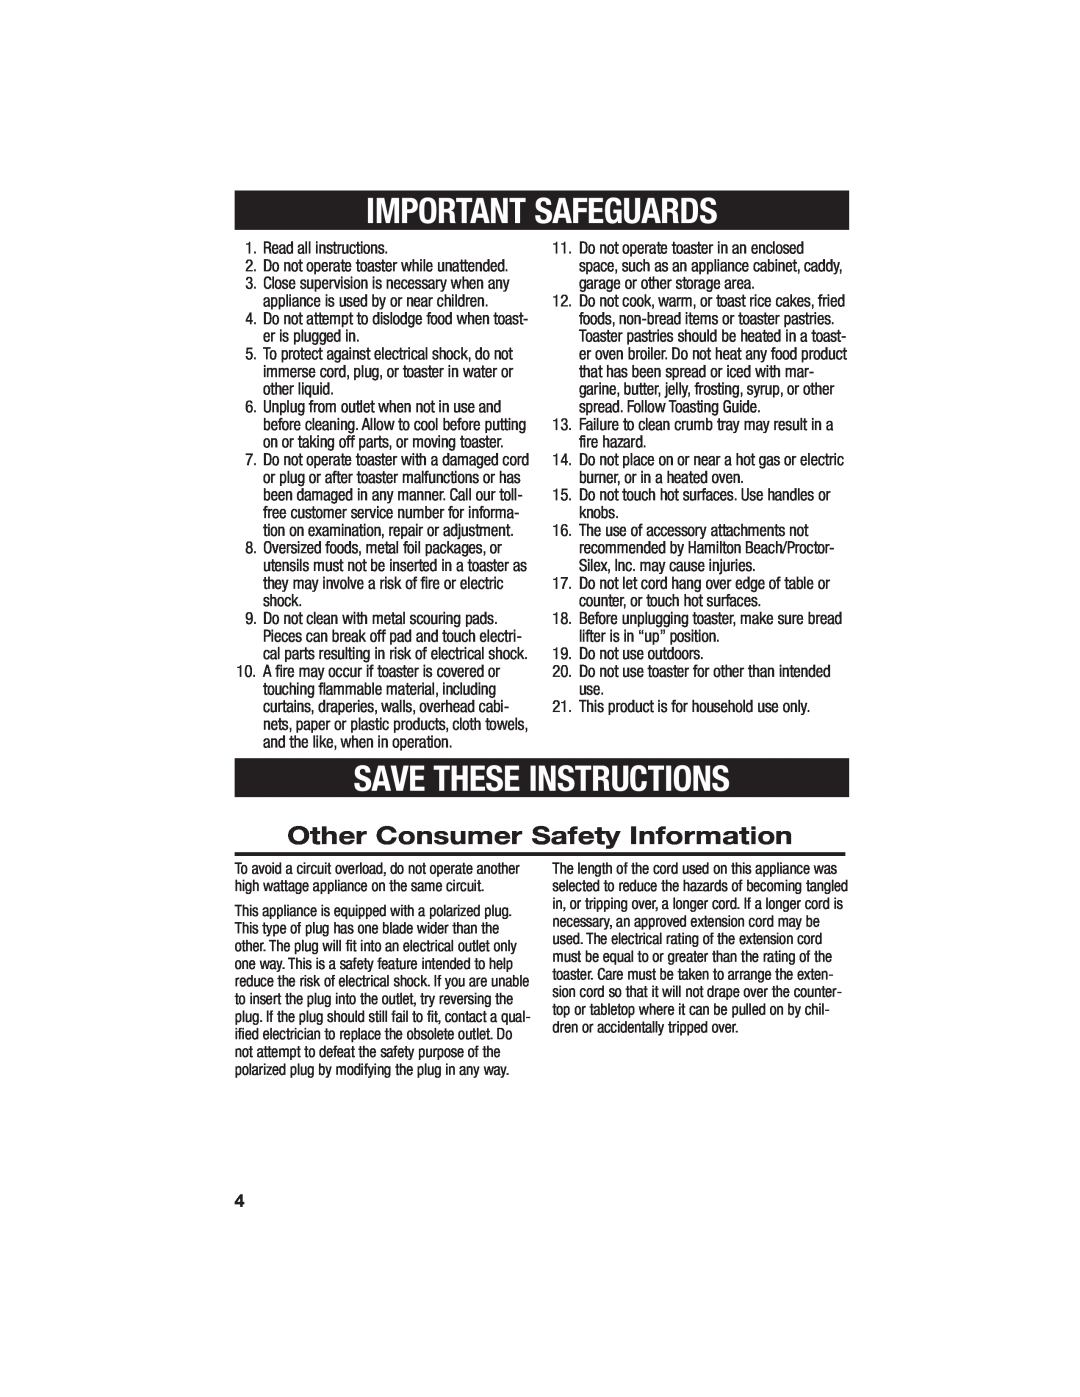 Hamilton Beach All-Metal Toaster manual Important Safeguards, Save These Instructions, Other Consumer Safety Information 